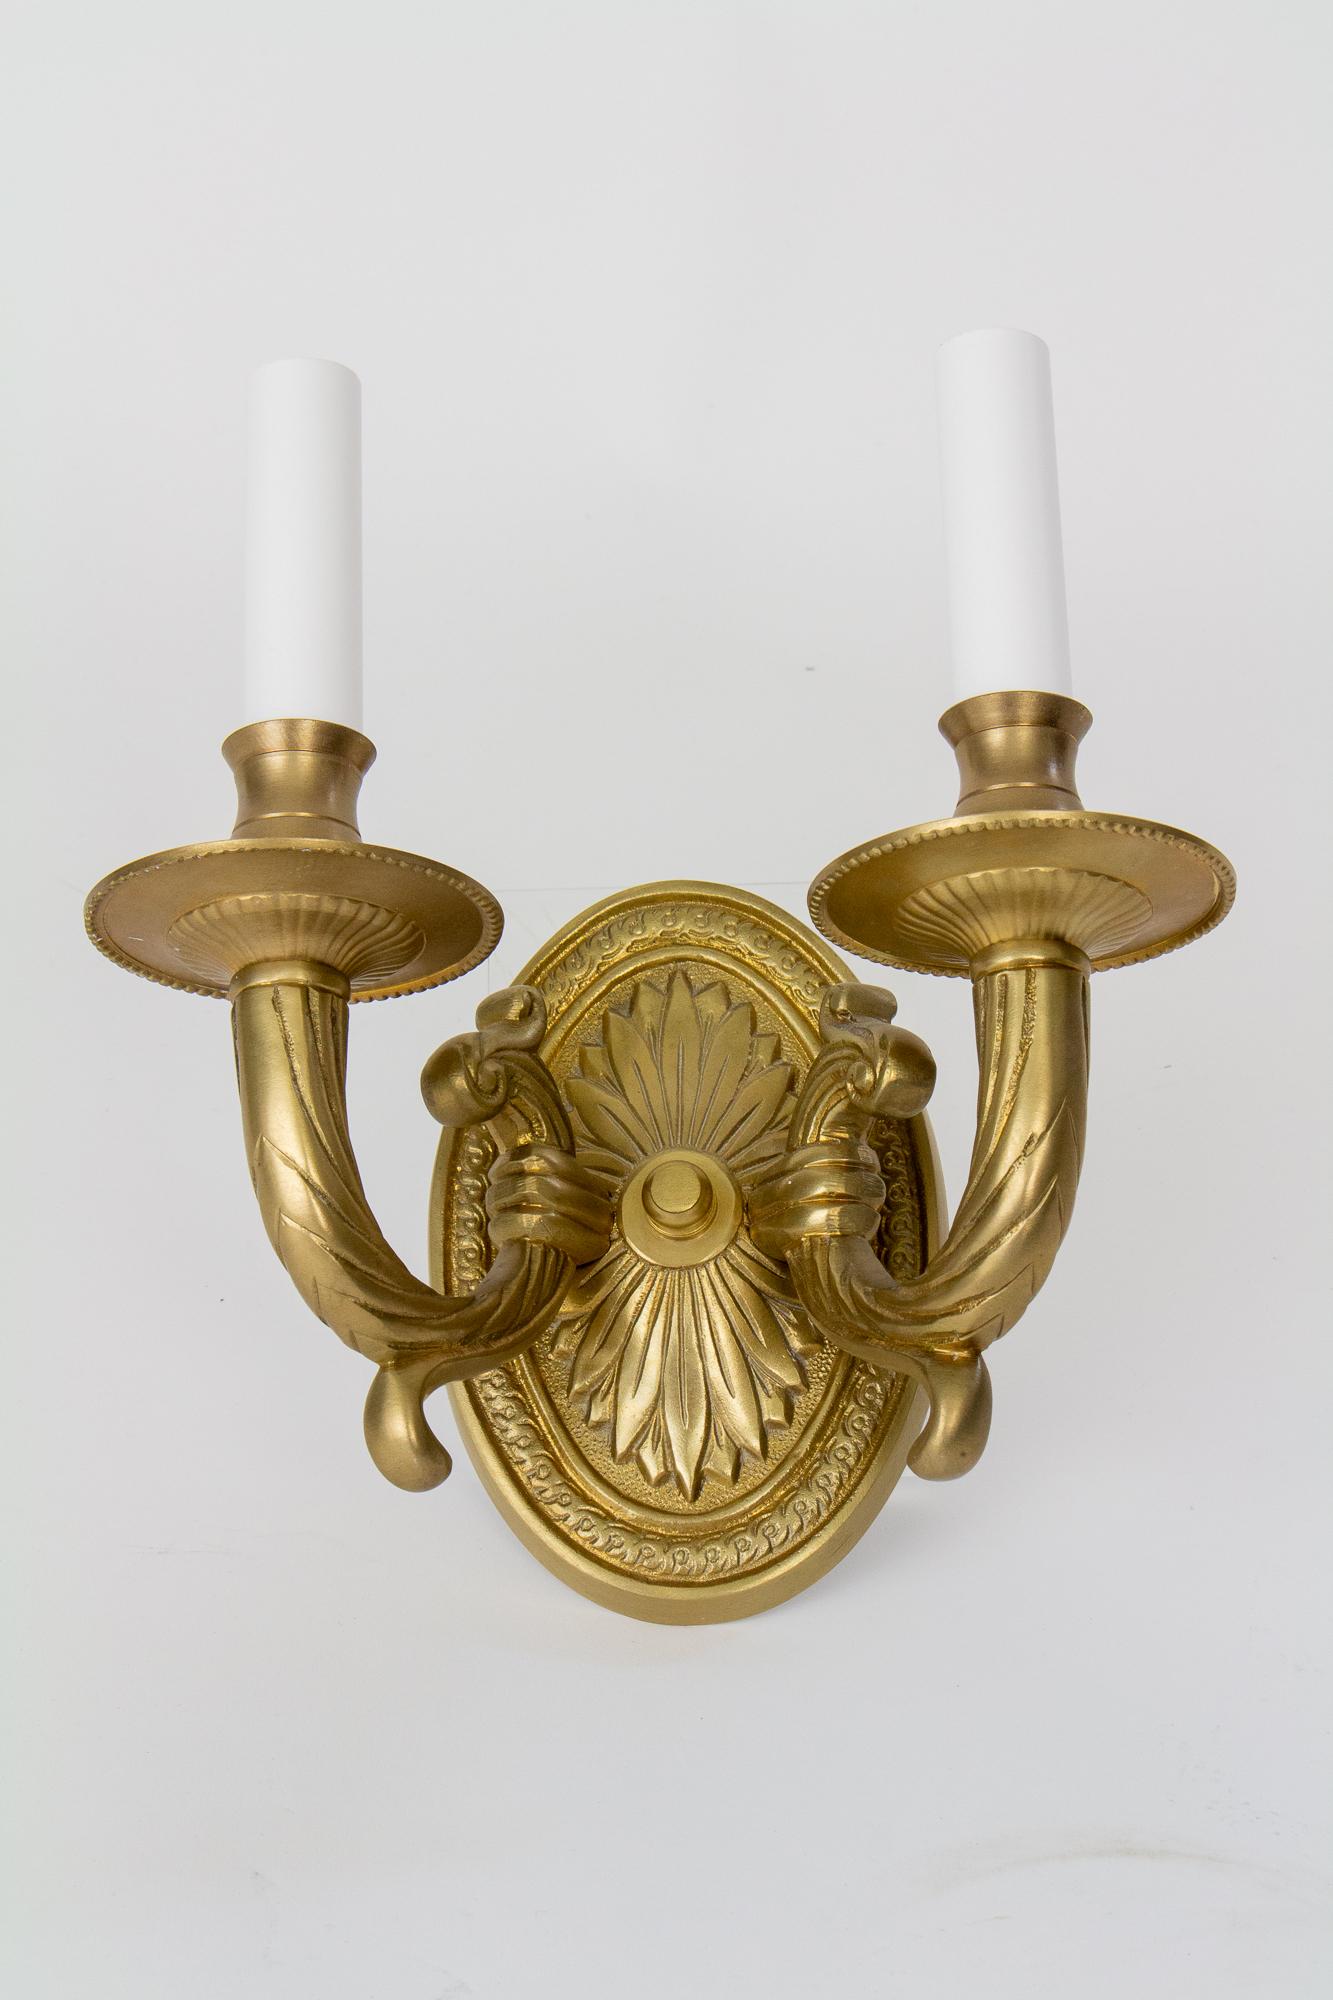 S373 Late 20th Century Cast Brass Two Arm Sconces, a Pair For Sale 1